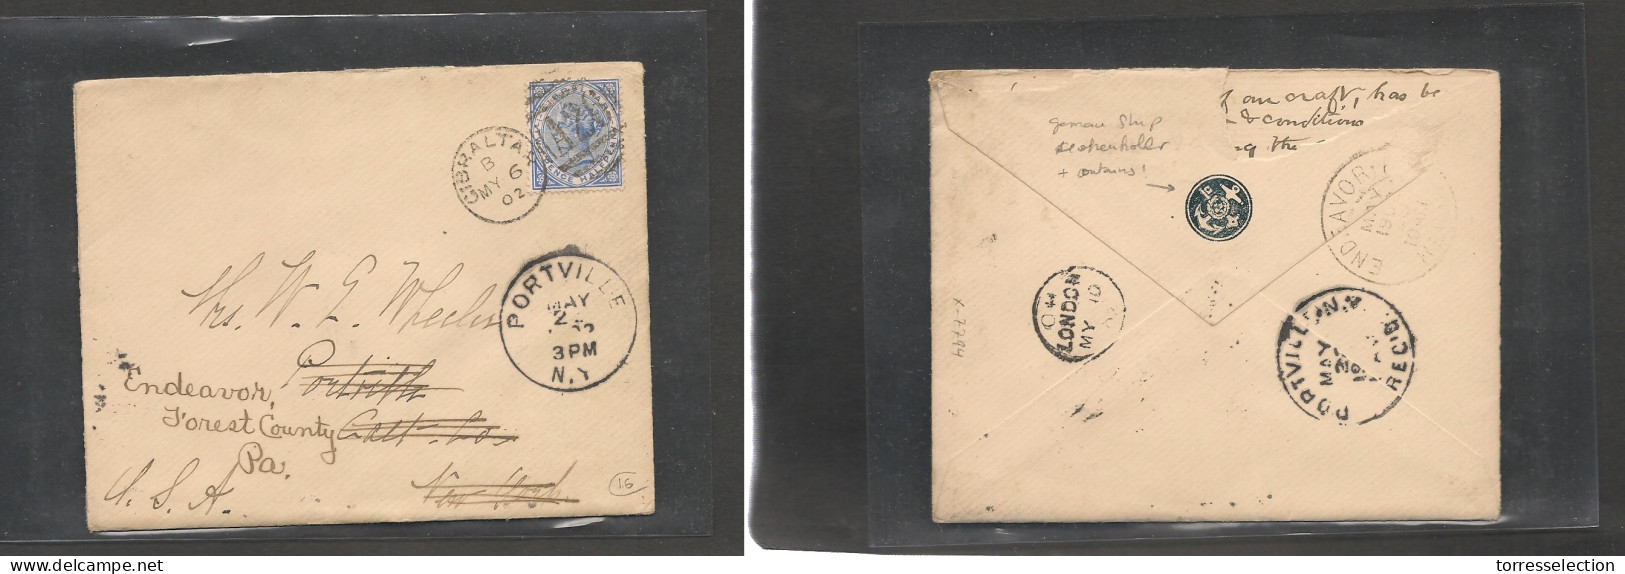 GIBRALTAR. Gibraltar Cover - 1902 GPO To USA NY Fkd Env 2.5d Tied Cds Grill, Fwded, Vf. With Contains XSALE. - Gibraltar